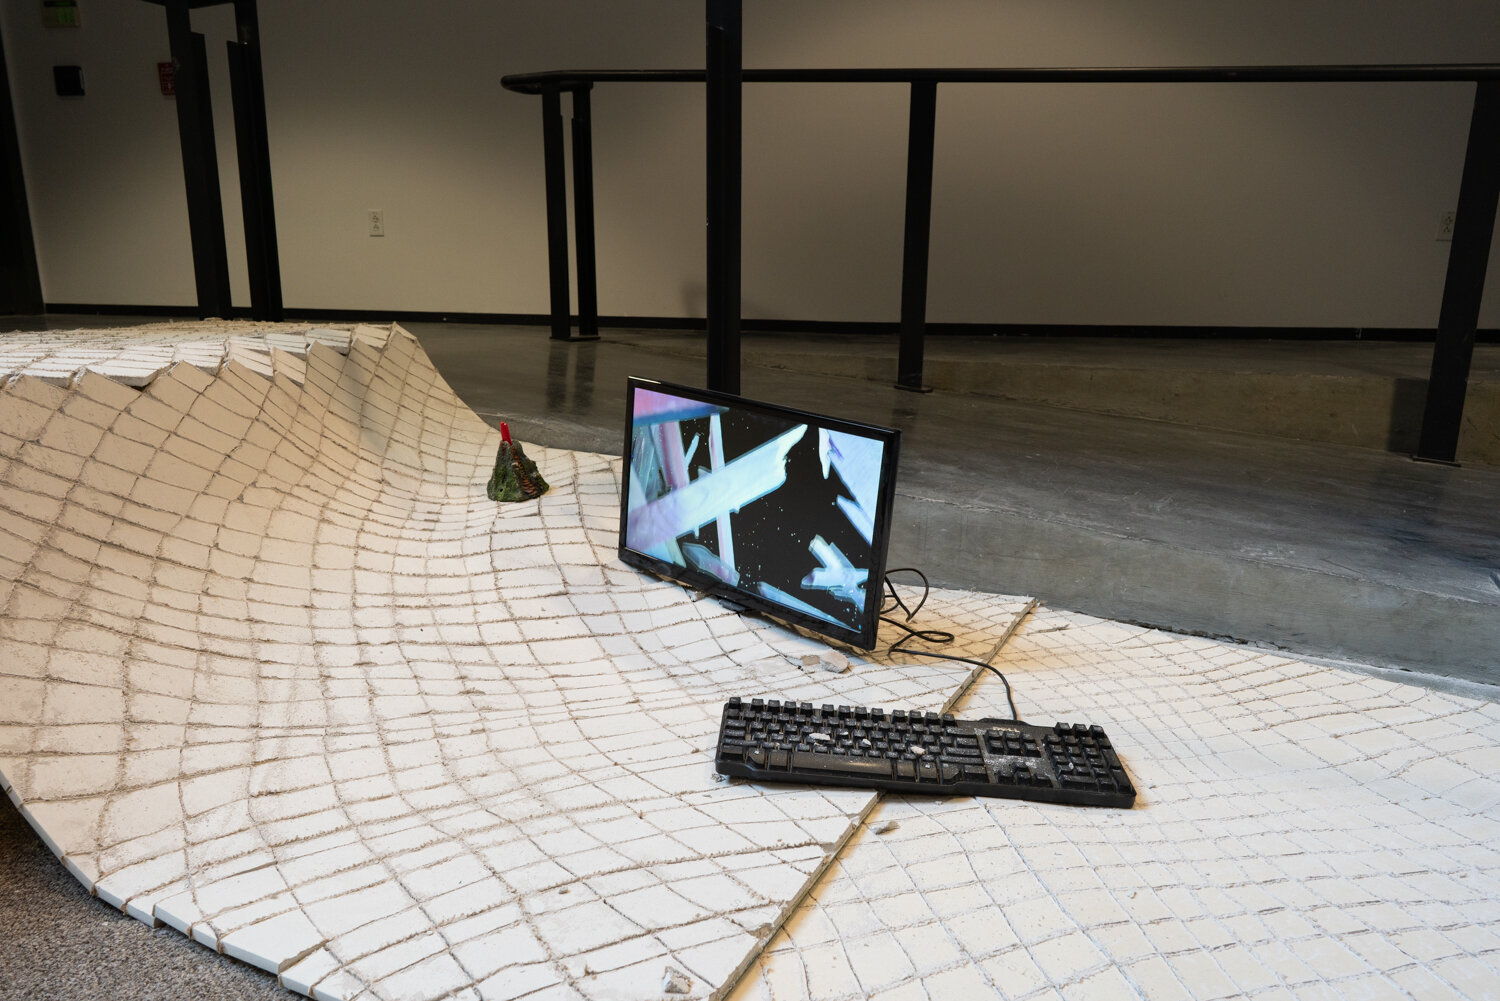  Alex Zak  Swamped , 2019 (detail) Sheet rock, plaster wrap, carpet, wood, steel, aluminum, paint, cement, sand, oven-bake clay,   office chair, modified ceiling fan, Monitor, Keyboard, aquarium volcano, red sharpie 192 x 204 x 196 inches (488 x 305 